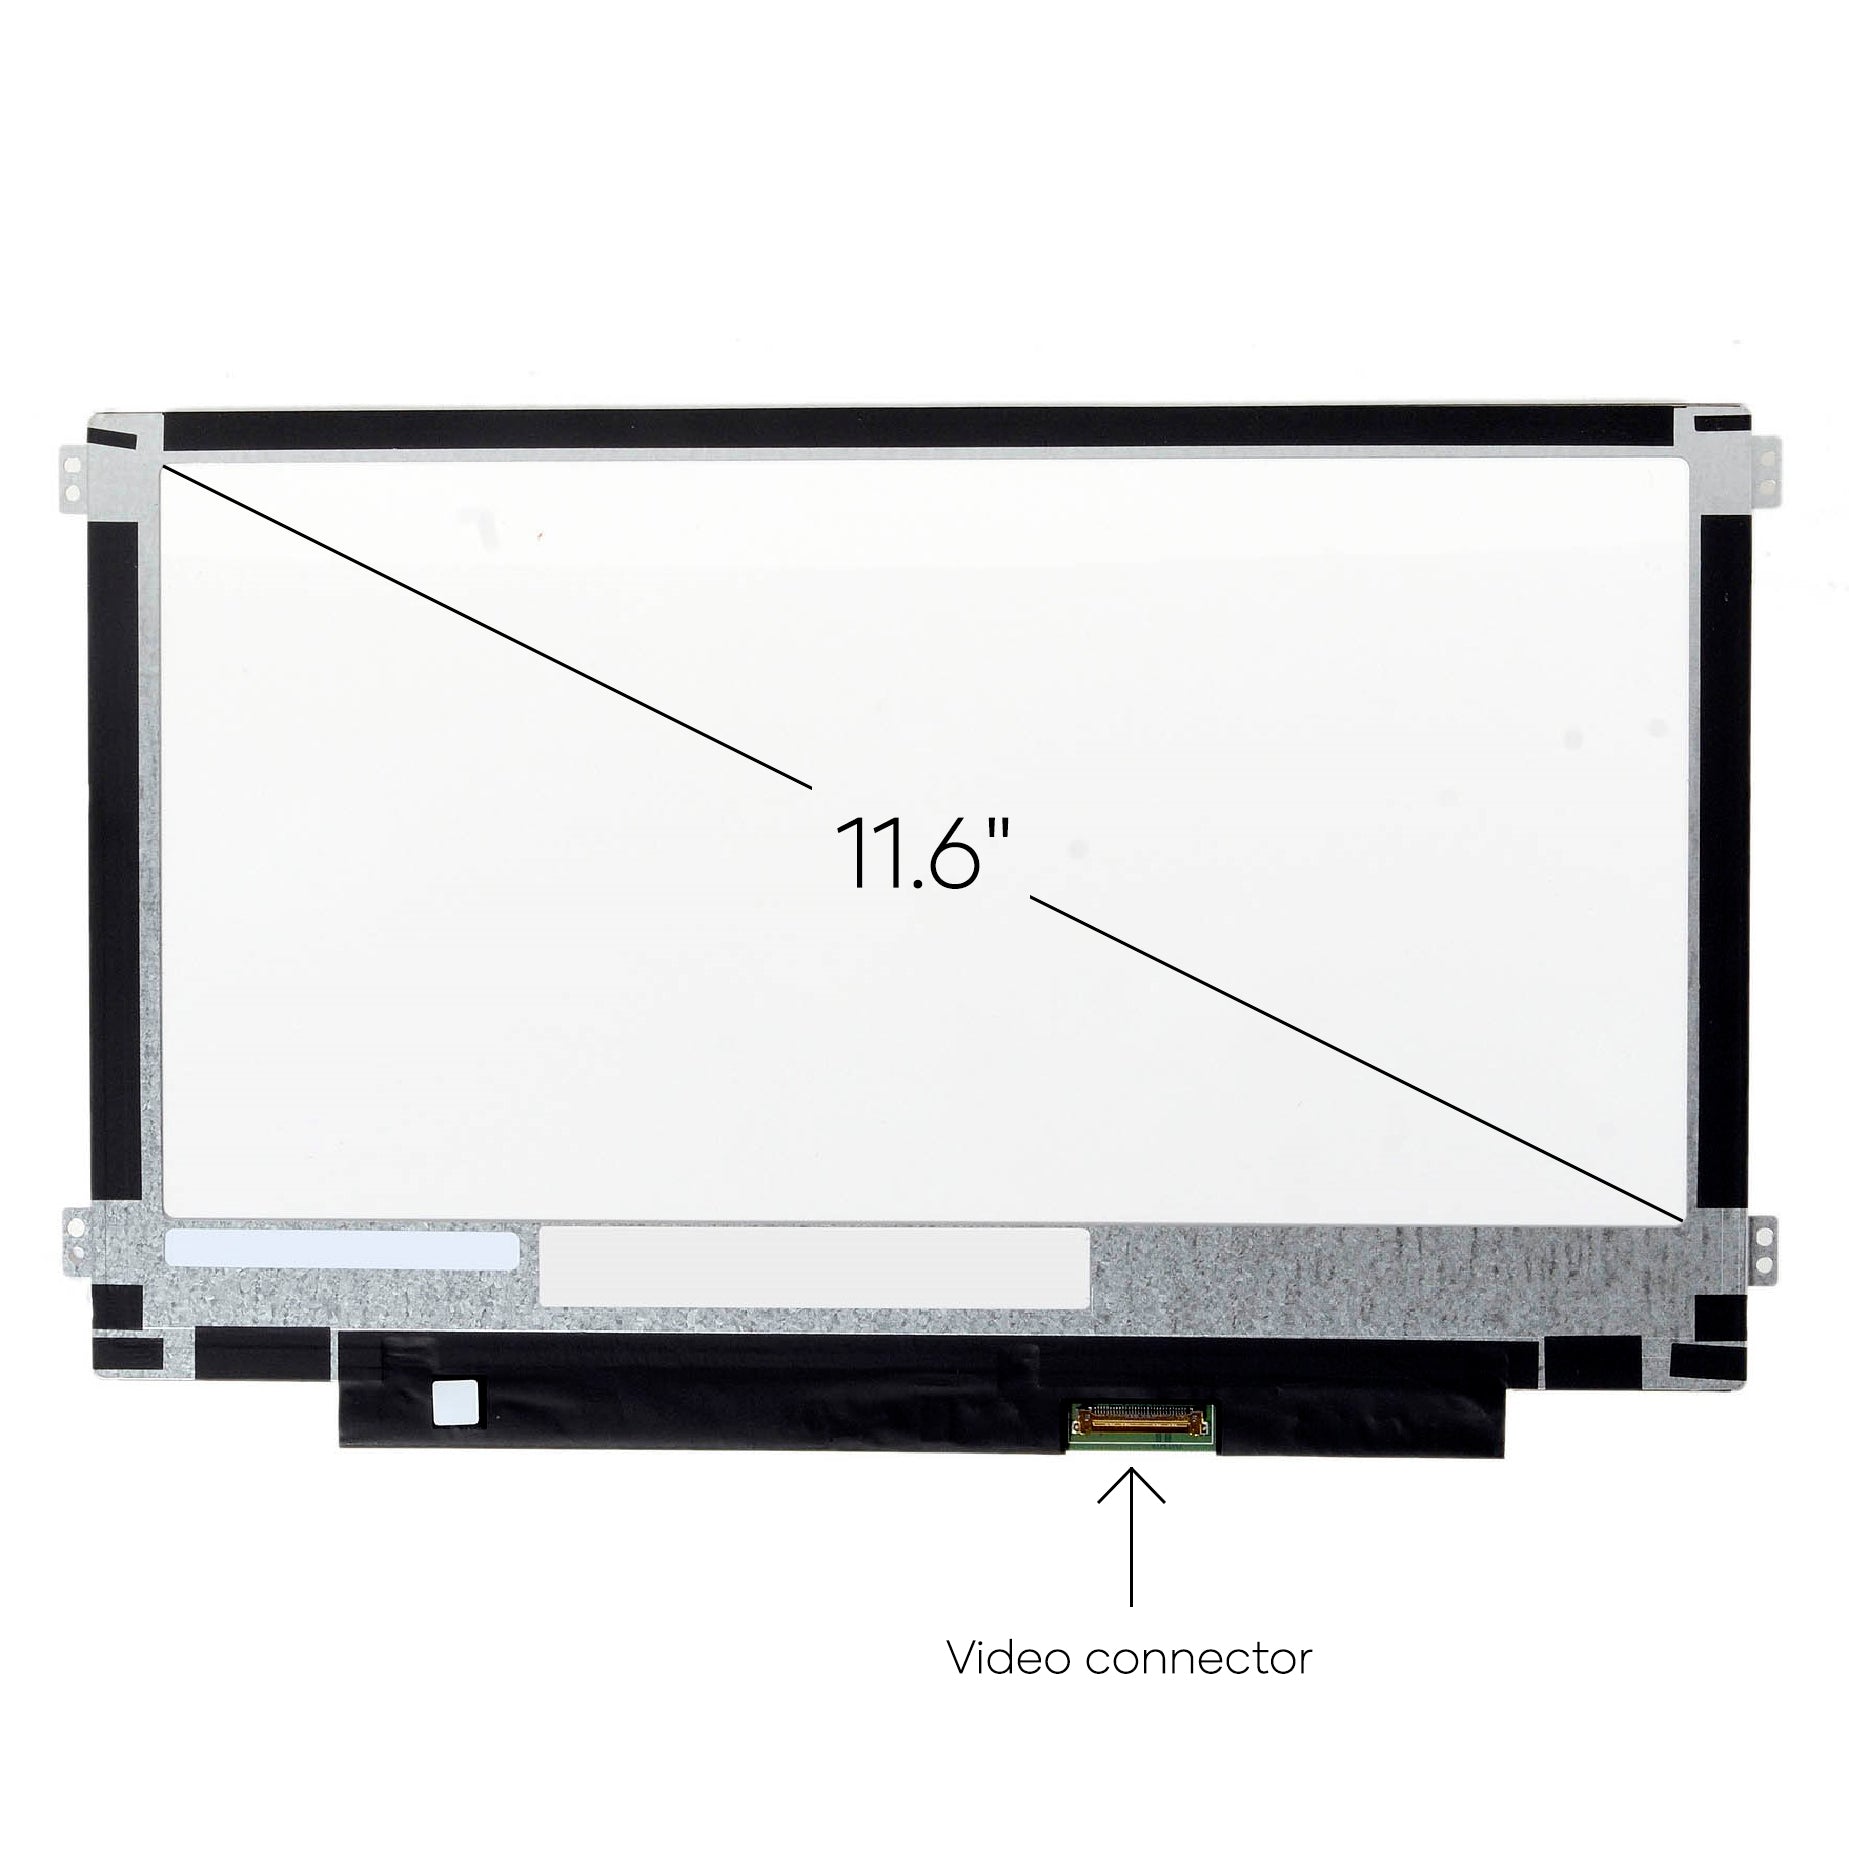 Screen Replacement for Samsung Chromebook XE501C13 HD 1366x768 Matte LCD LED Display